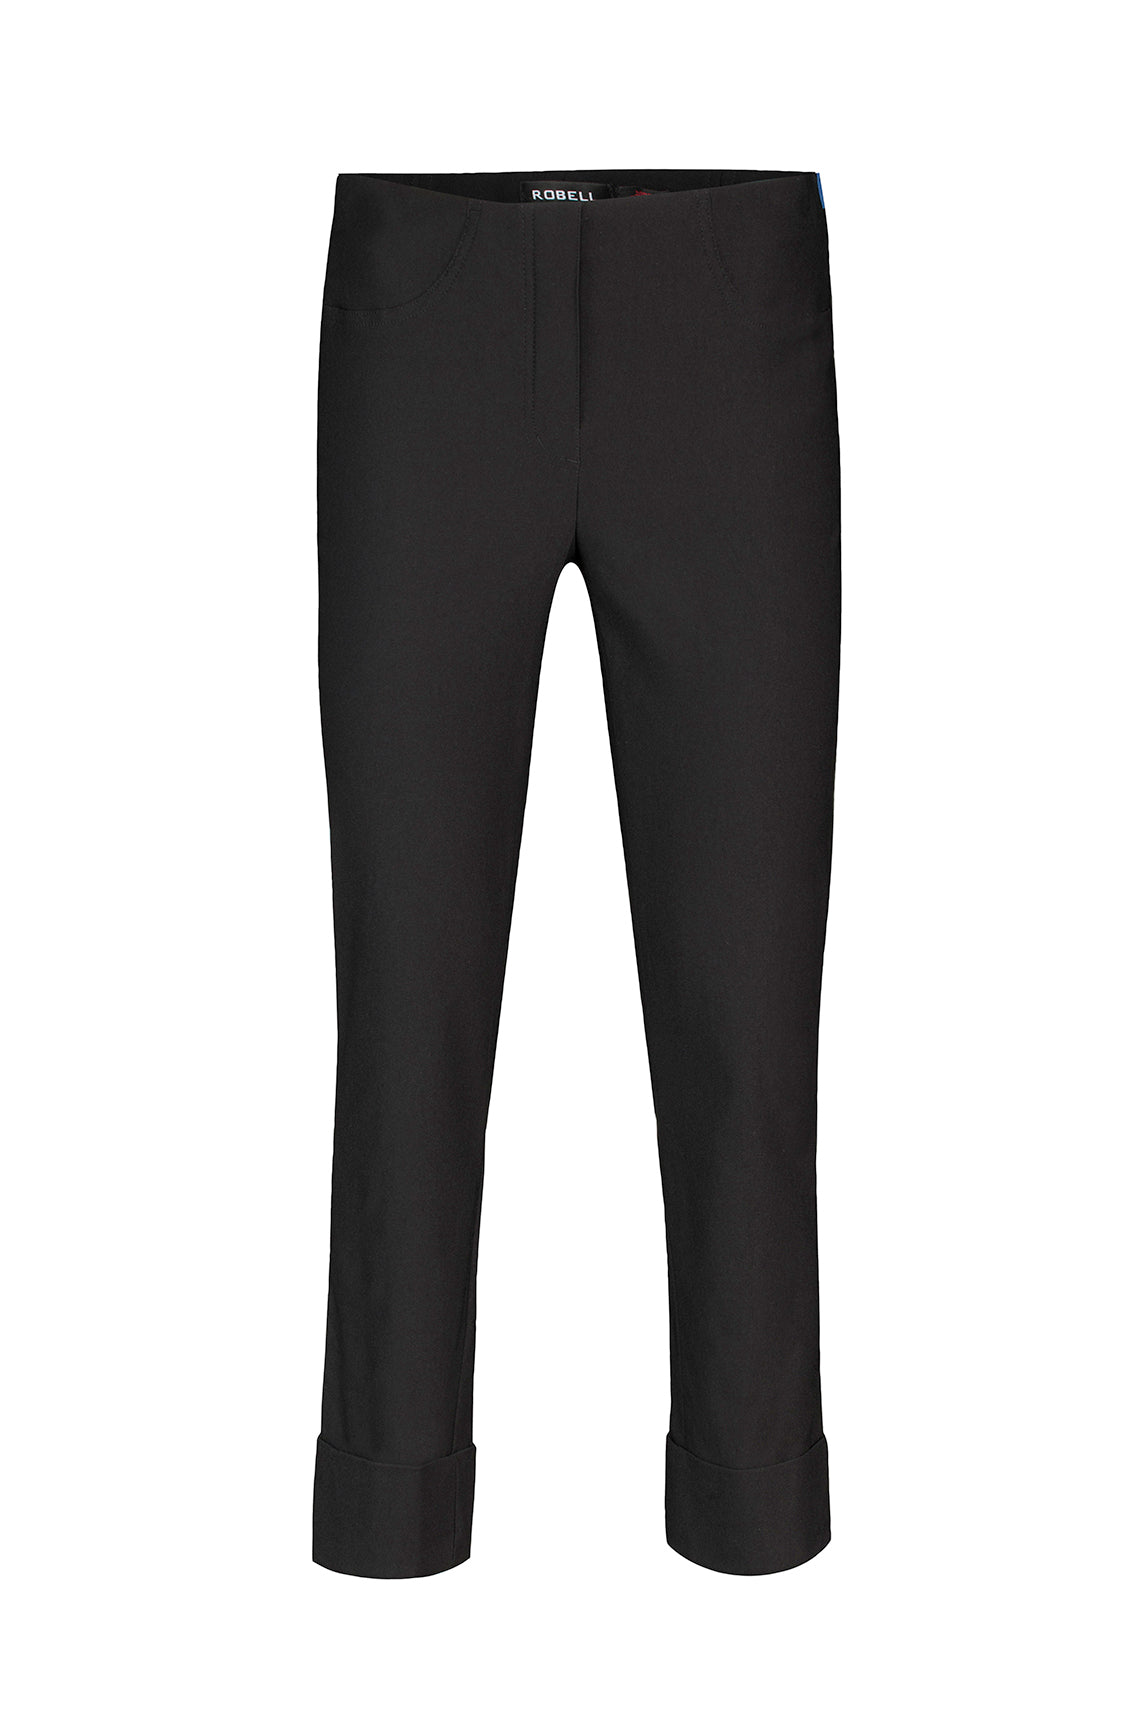 Robell 7/8ths Trousers | Black